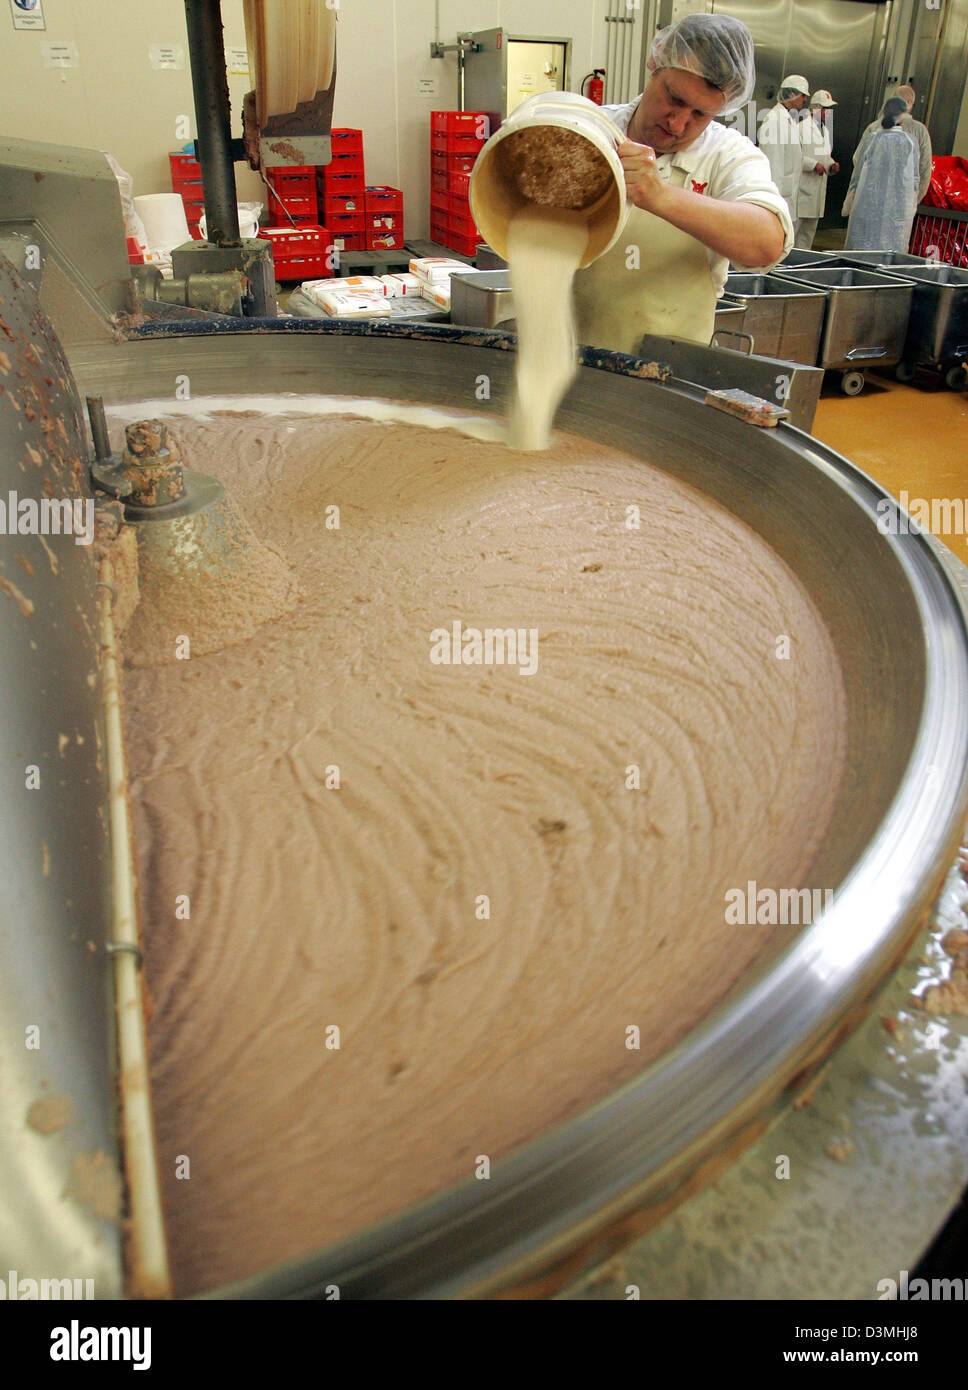 An employee of  'Ruegenwalder Muehle' pours some flavouring into a huge boiler full of sausage mass at the company's factory site in Bad Zwischenahn, Germany, Thursday, 16 March 2006. The company makes amongst others the famous 'Teewurst' (smoked pork pate), which is a registered trademark since 1957. Photo: Ingo Wagner Stock Photo